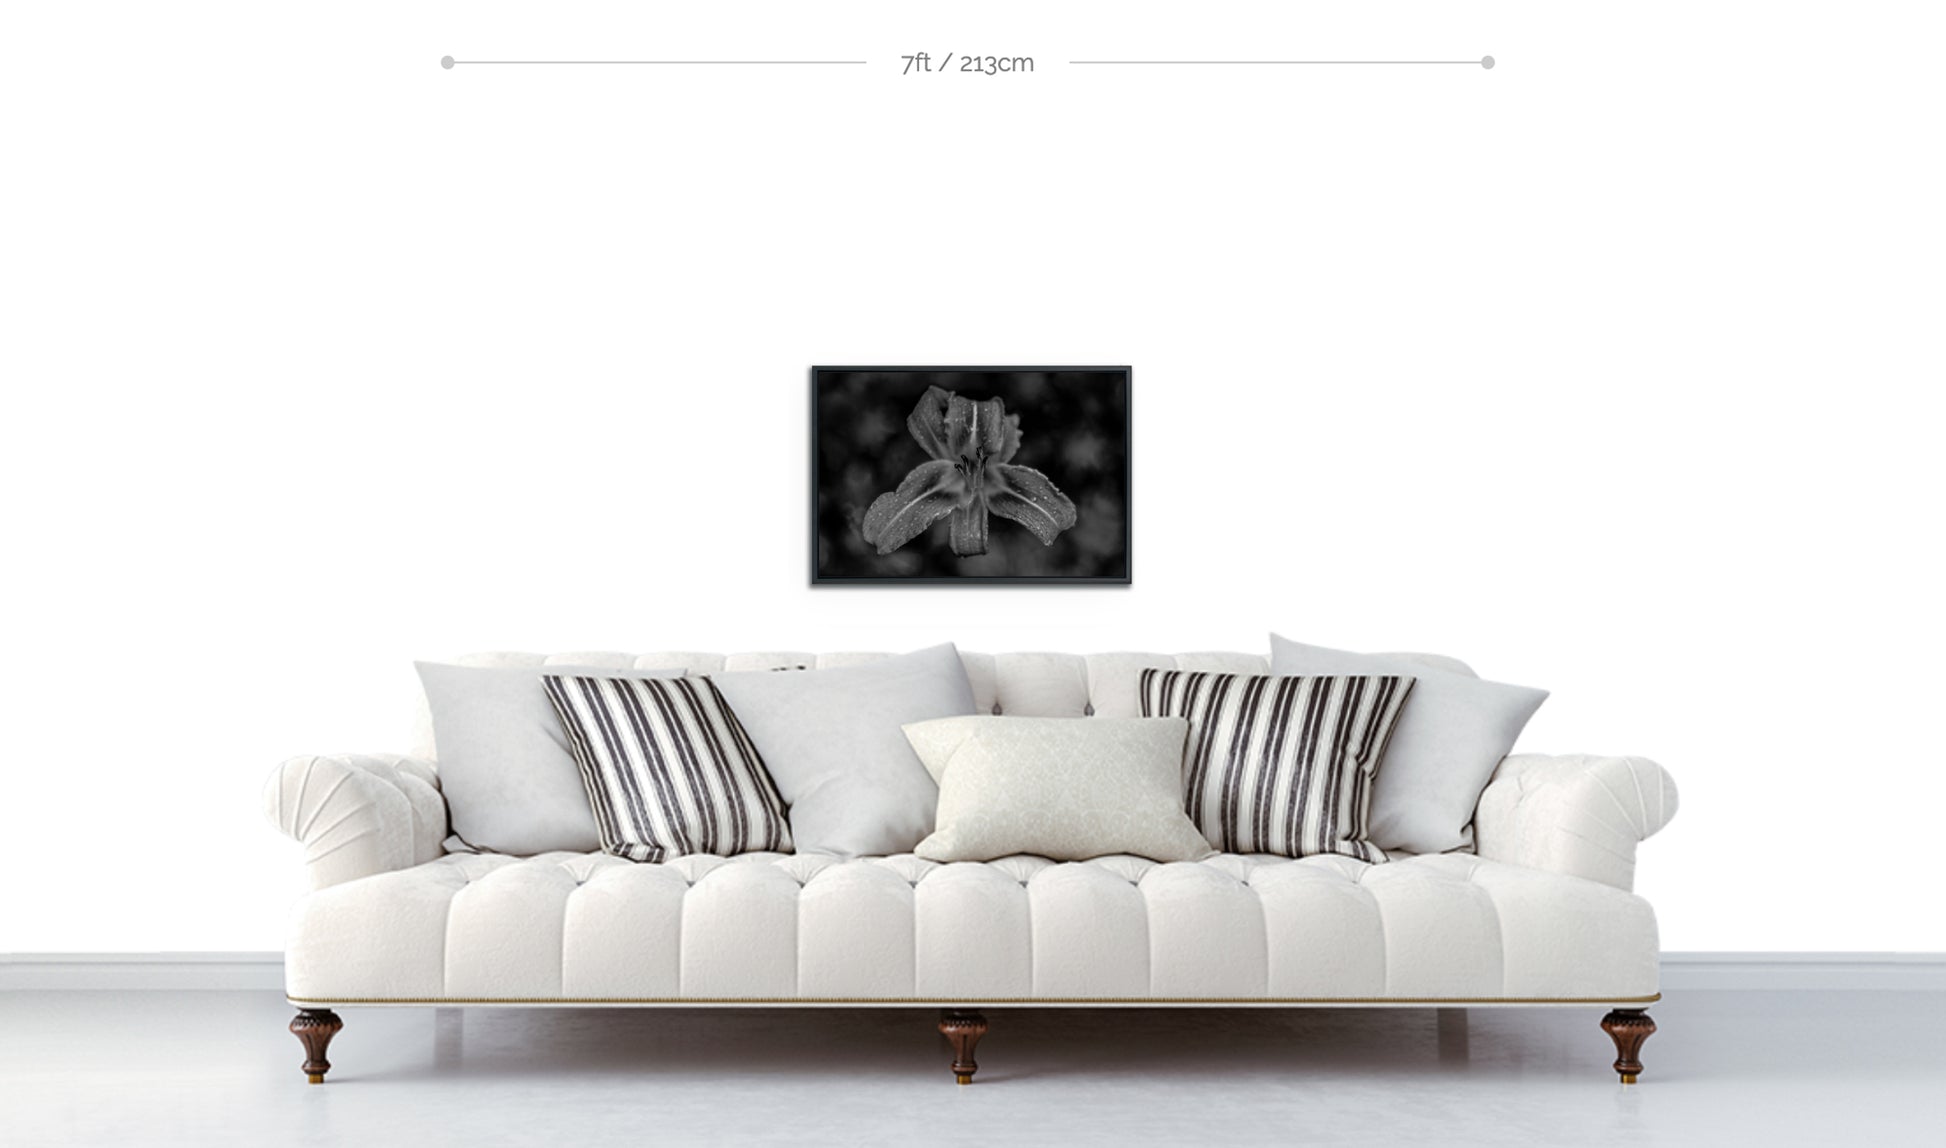 Metal print framed black and white closeup photograph daylily hanging above sofa